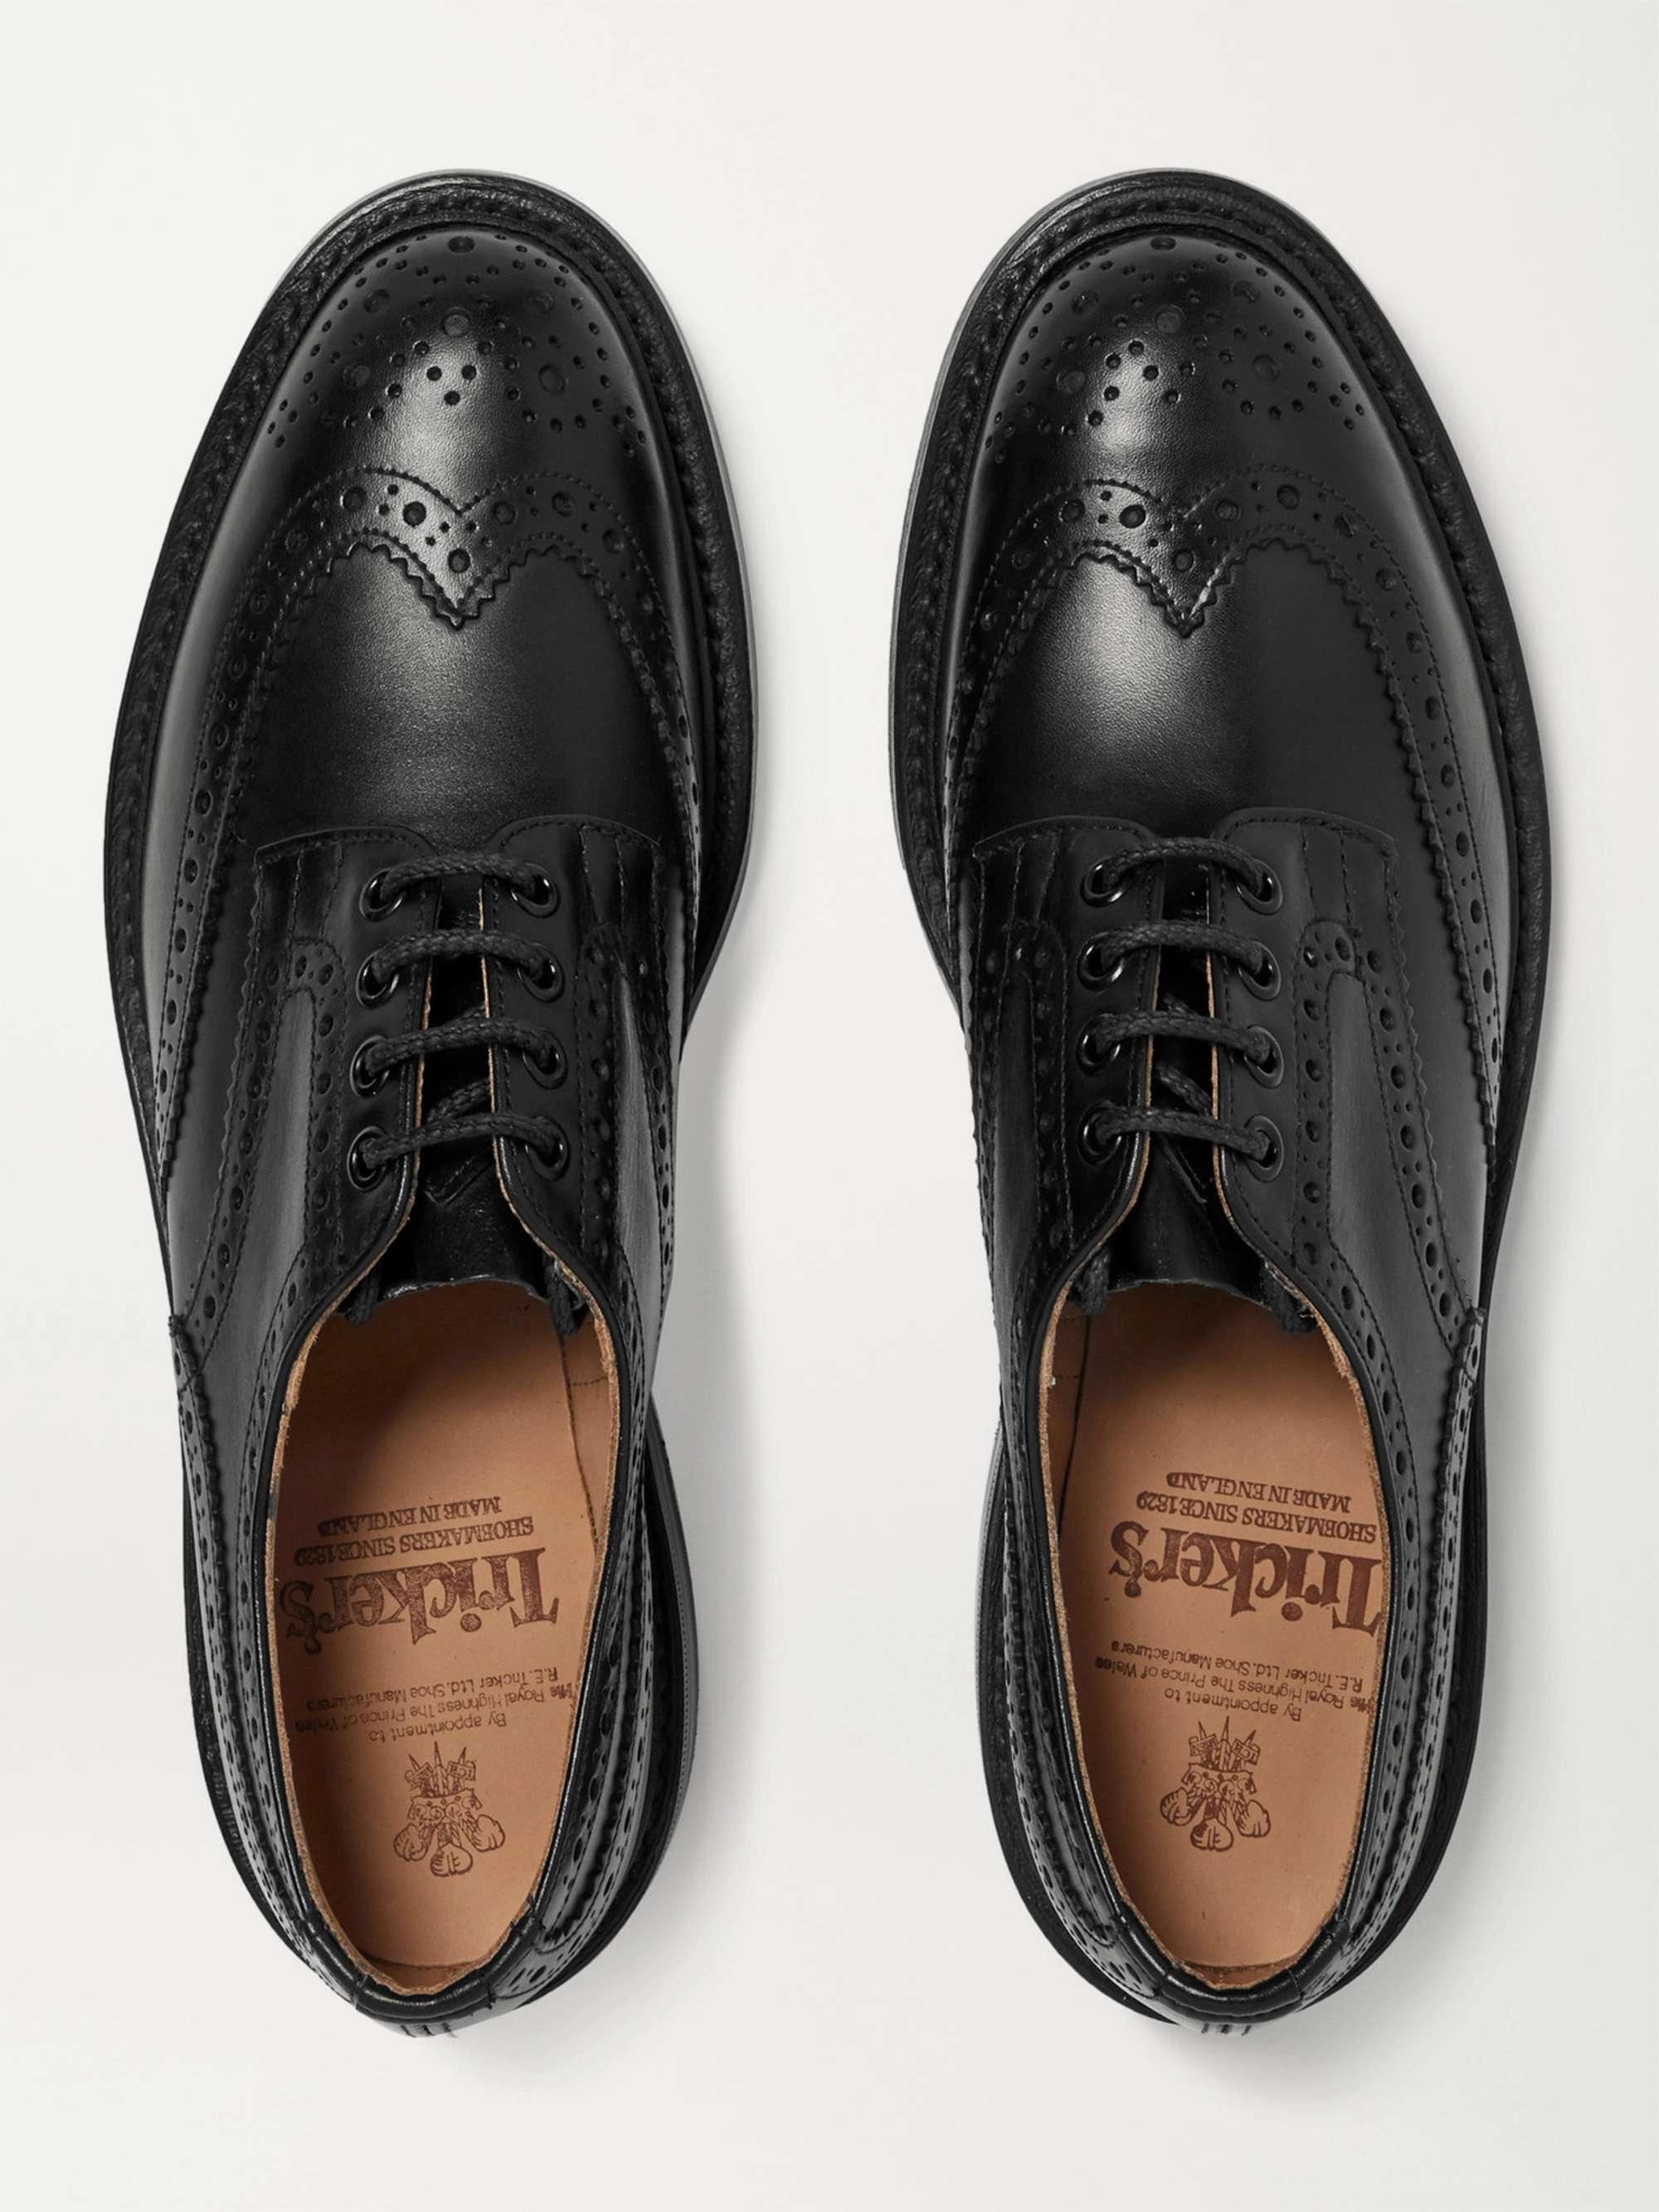 TRICKER'S Bourton Leather Wingtip Brogues